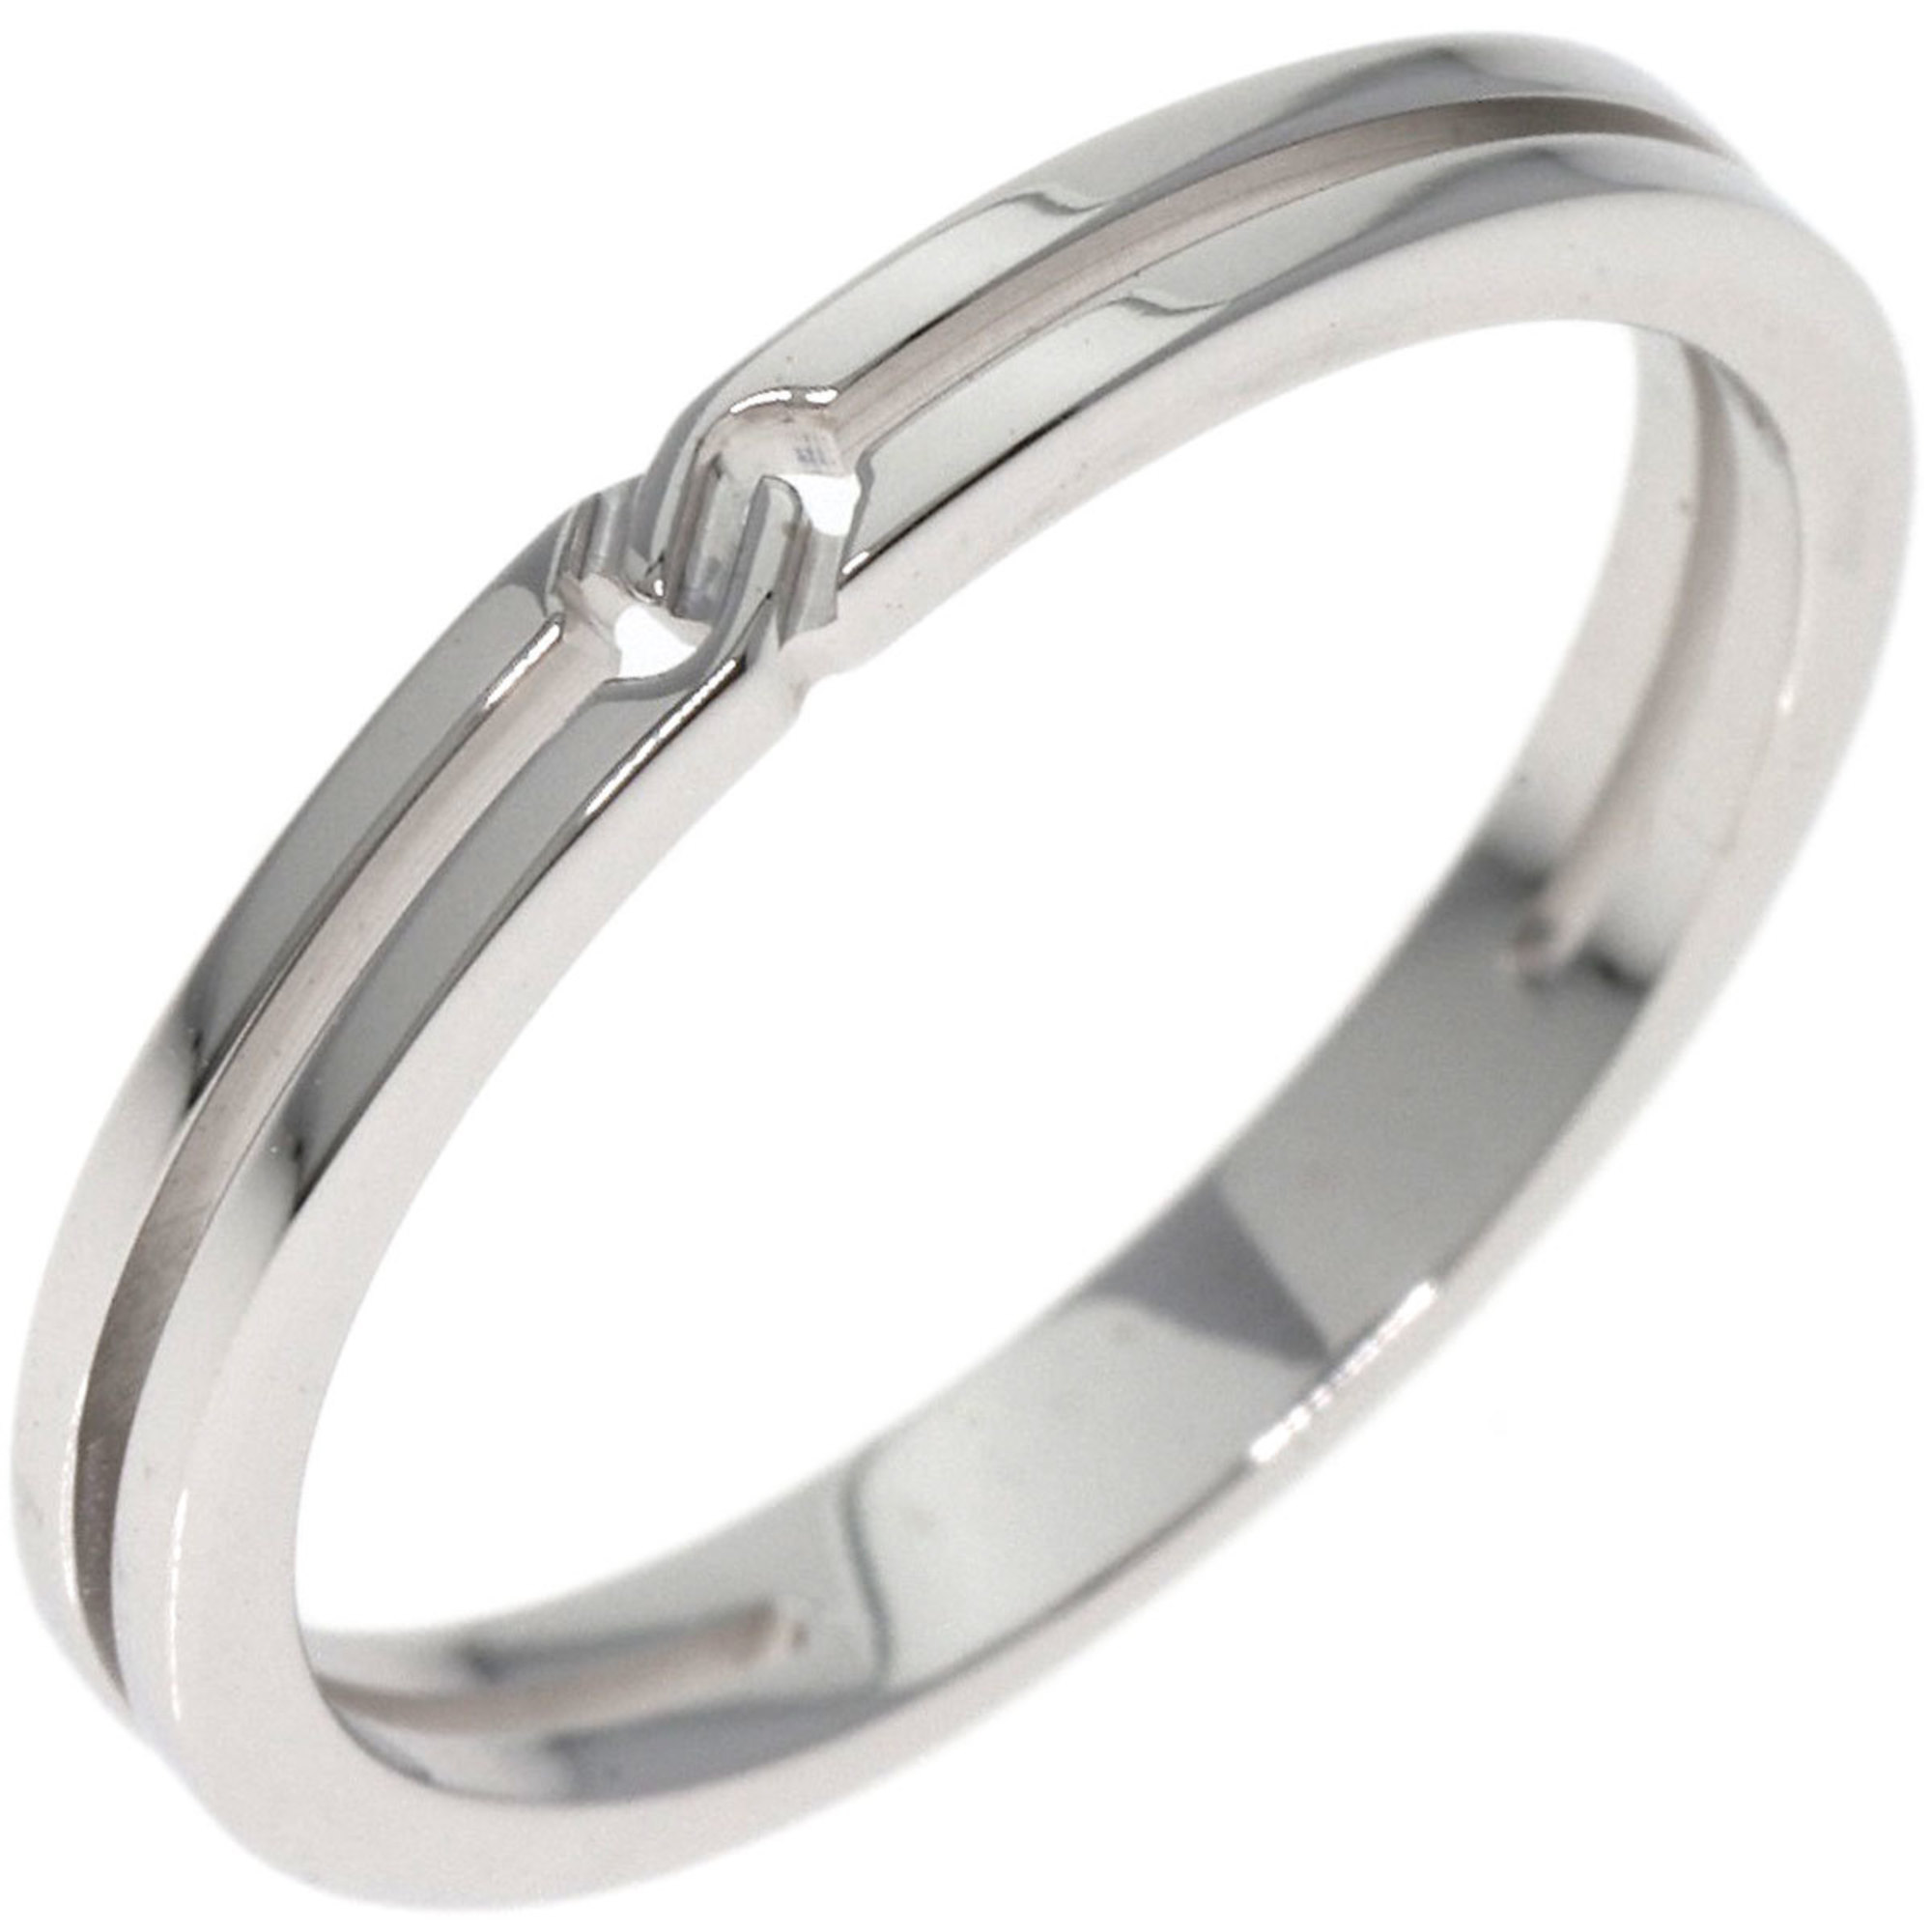 Gucci Infinity 2mm #8 Ring K18 White Gold Women's GUCCI